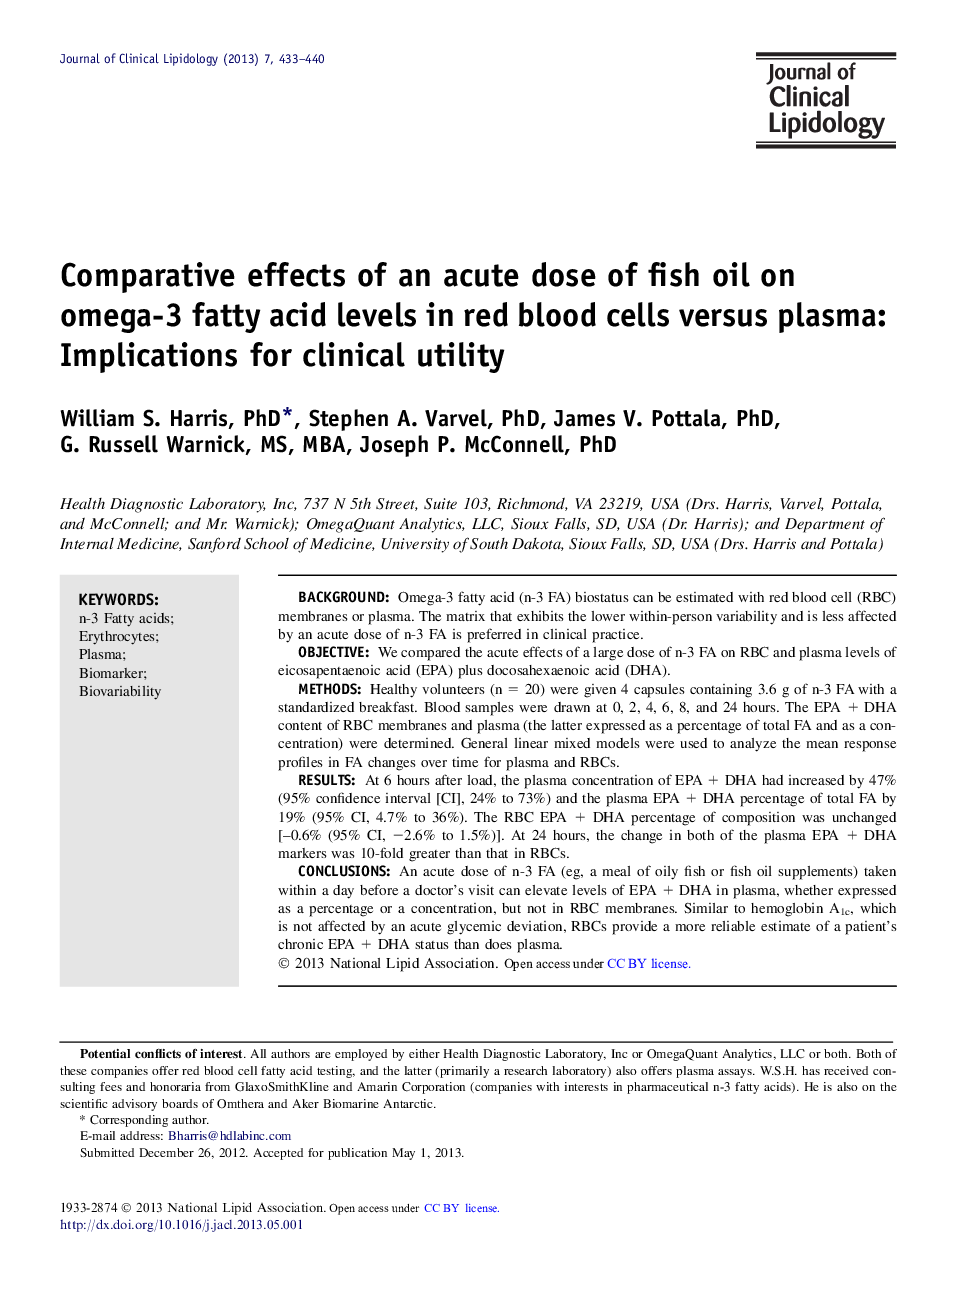 Comparative effects of an acute dose of fish oil on omega-3 fatty acid levels in red blood cells versus plasma: Implications for clinical utility